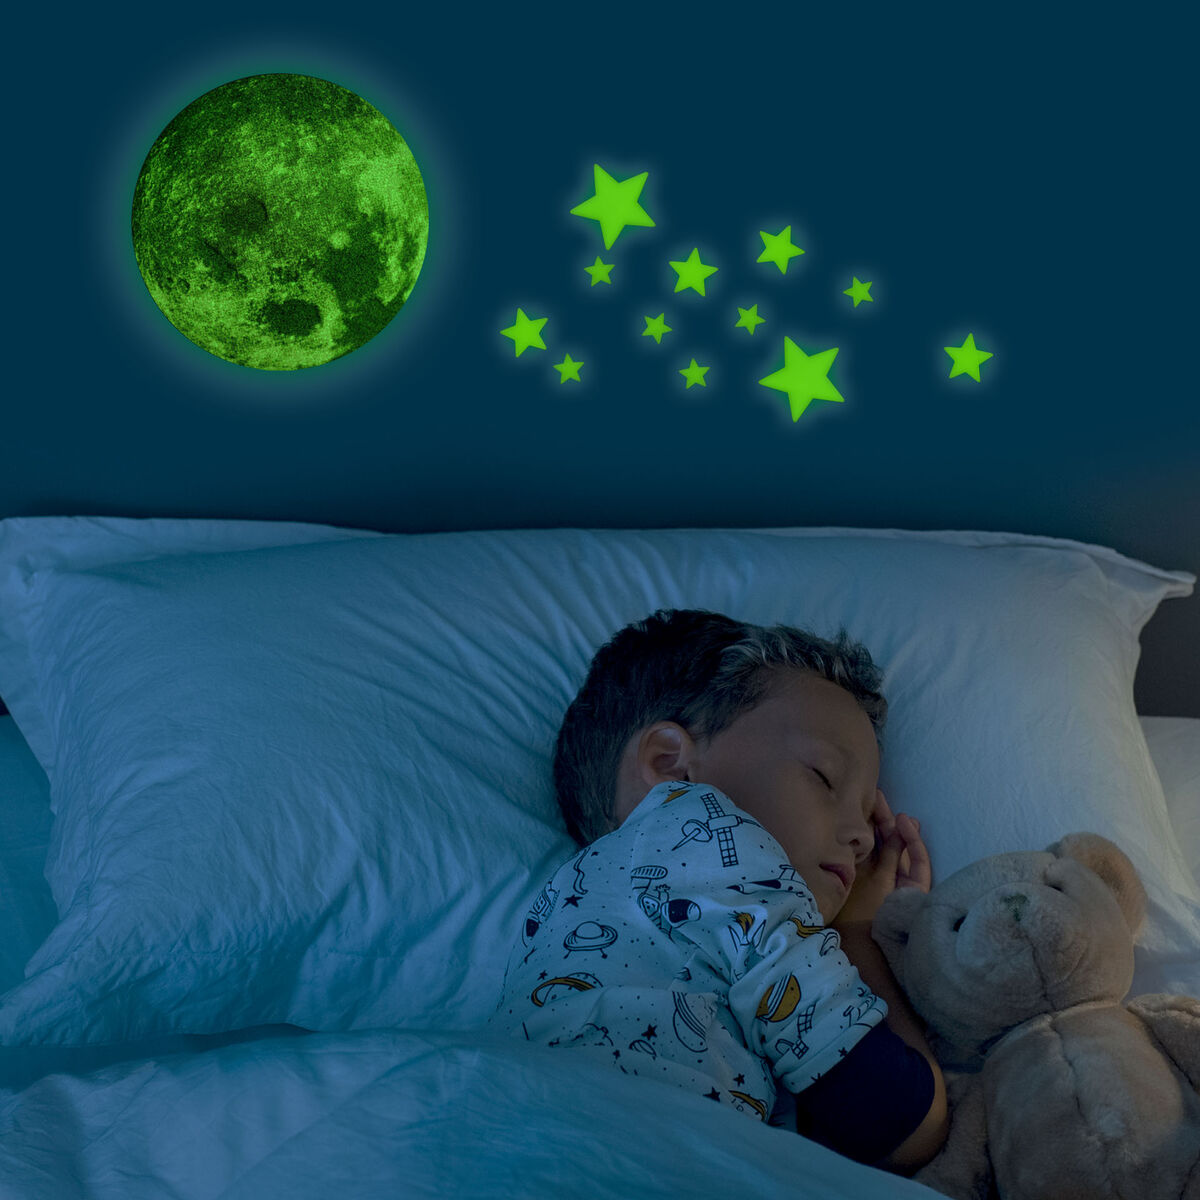 Gift | Legami Super Stars - Adhesive Glow-in-the-Dark Stars by Weirs of Baggot St